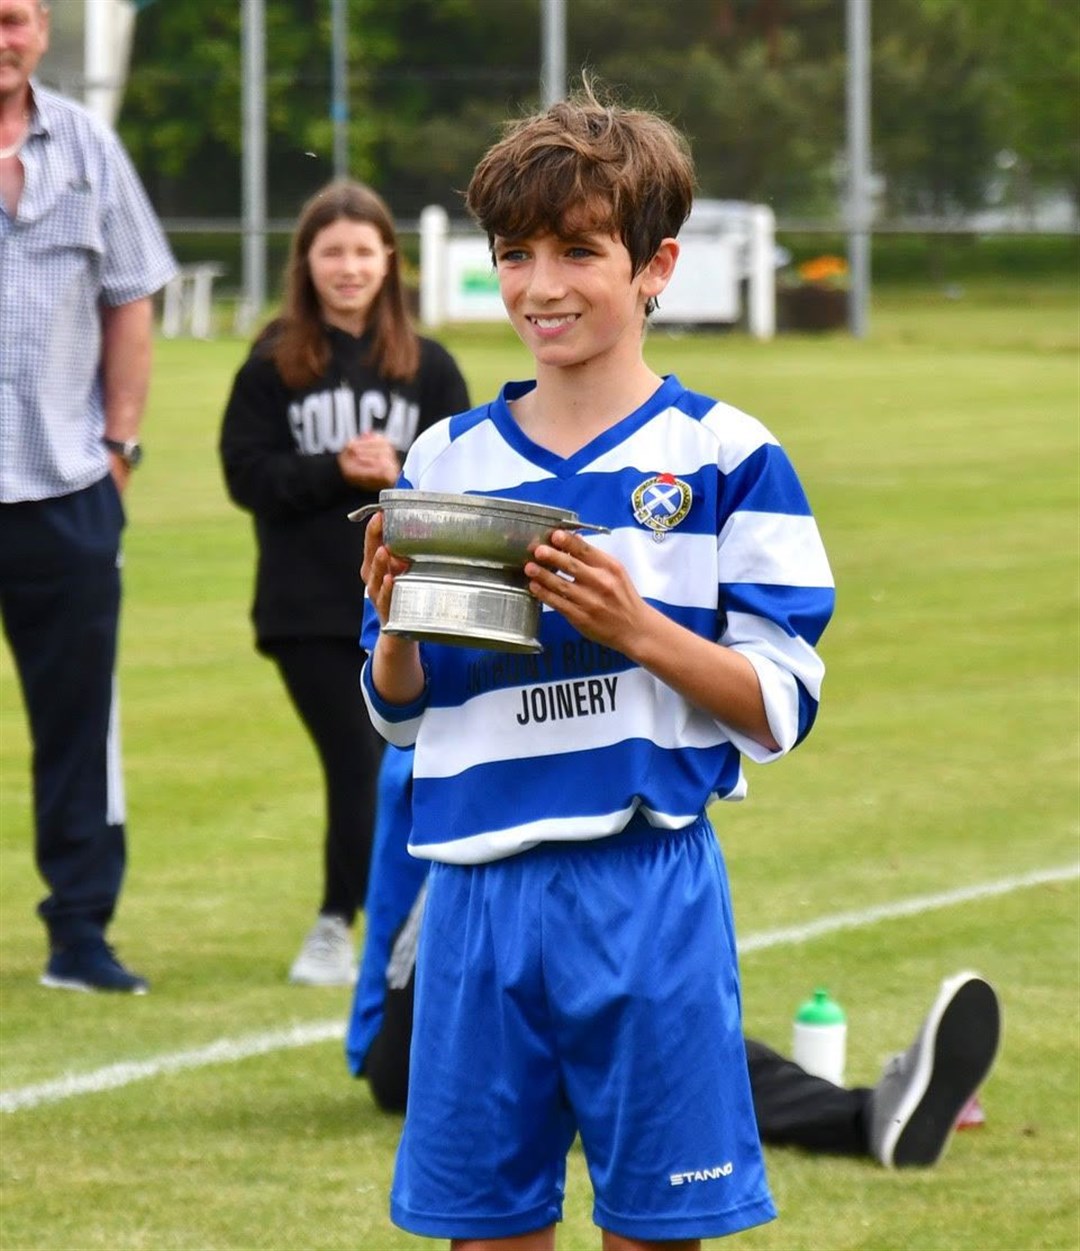 Joe Coyle will be one of the Newtonmore players representing the North.